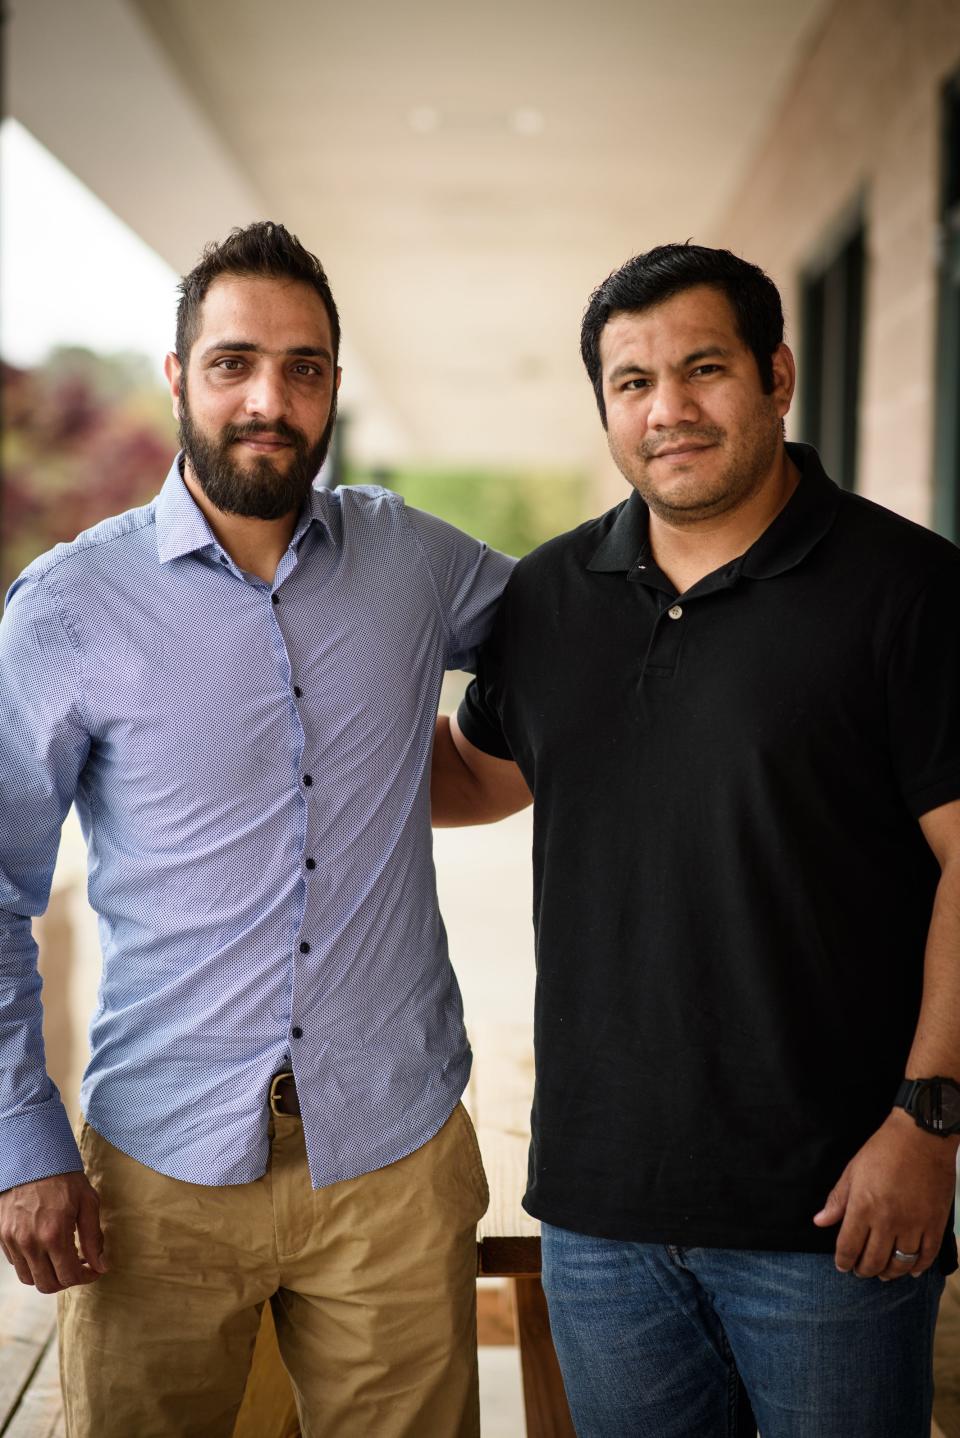 Rafi, left, who was wounded while serving alongside American service members has relocated to Fayetteville. Emanuel "Manny" Munguia, right, is a Special Forces soldier, who served alongside Rafi, is helping and advocating on Rafi's behalf in the U.S. 